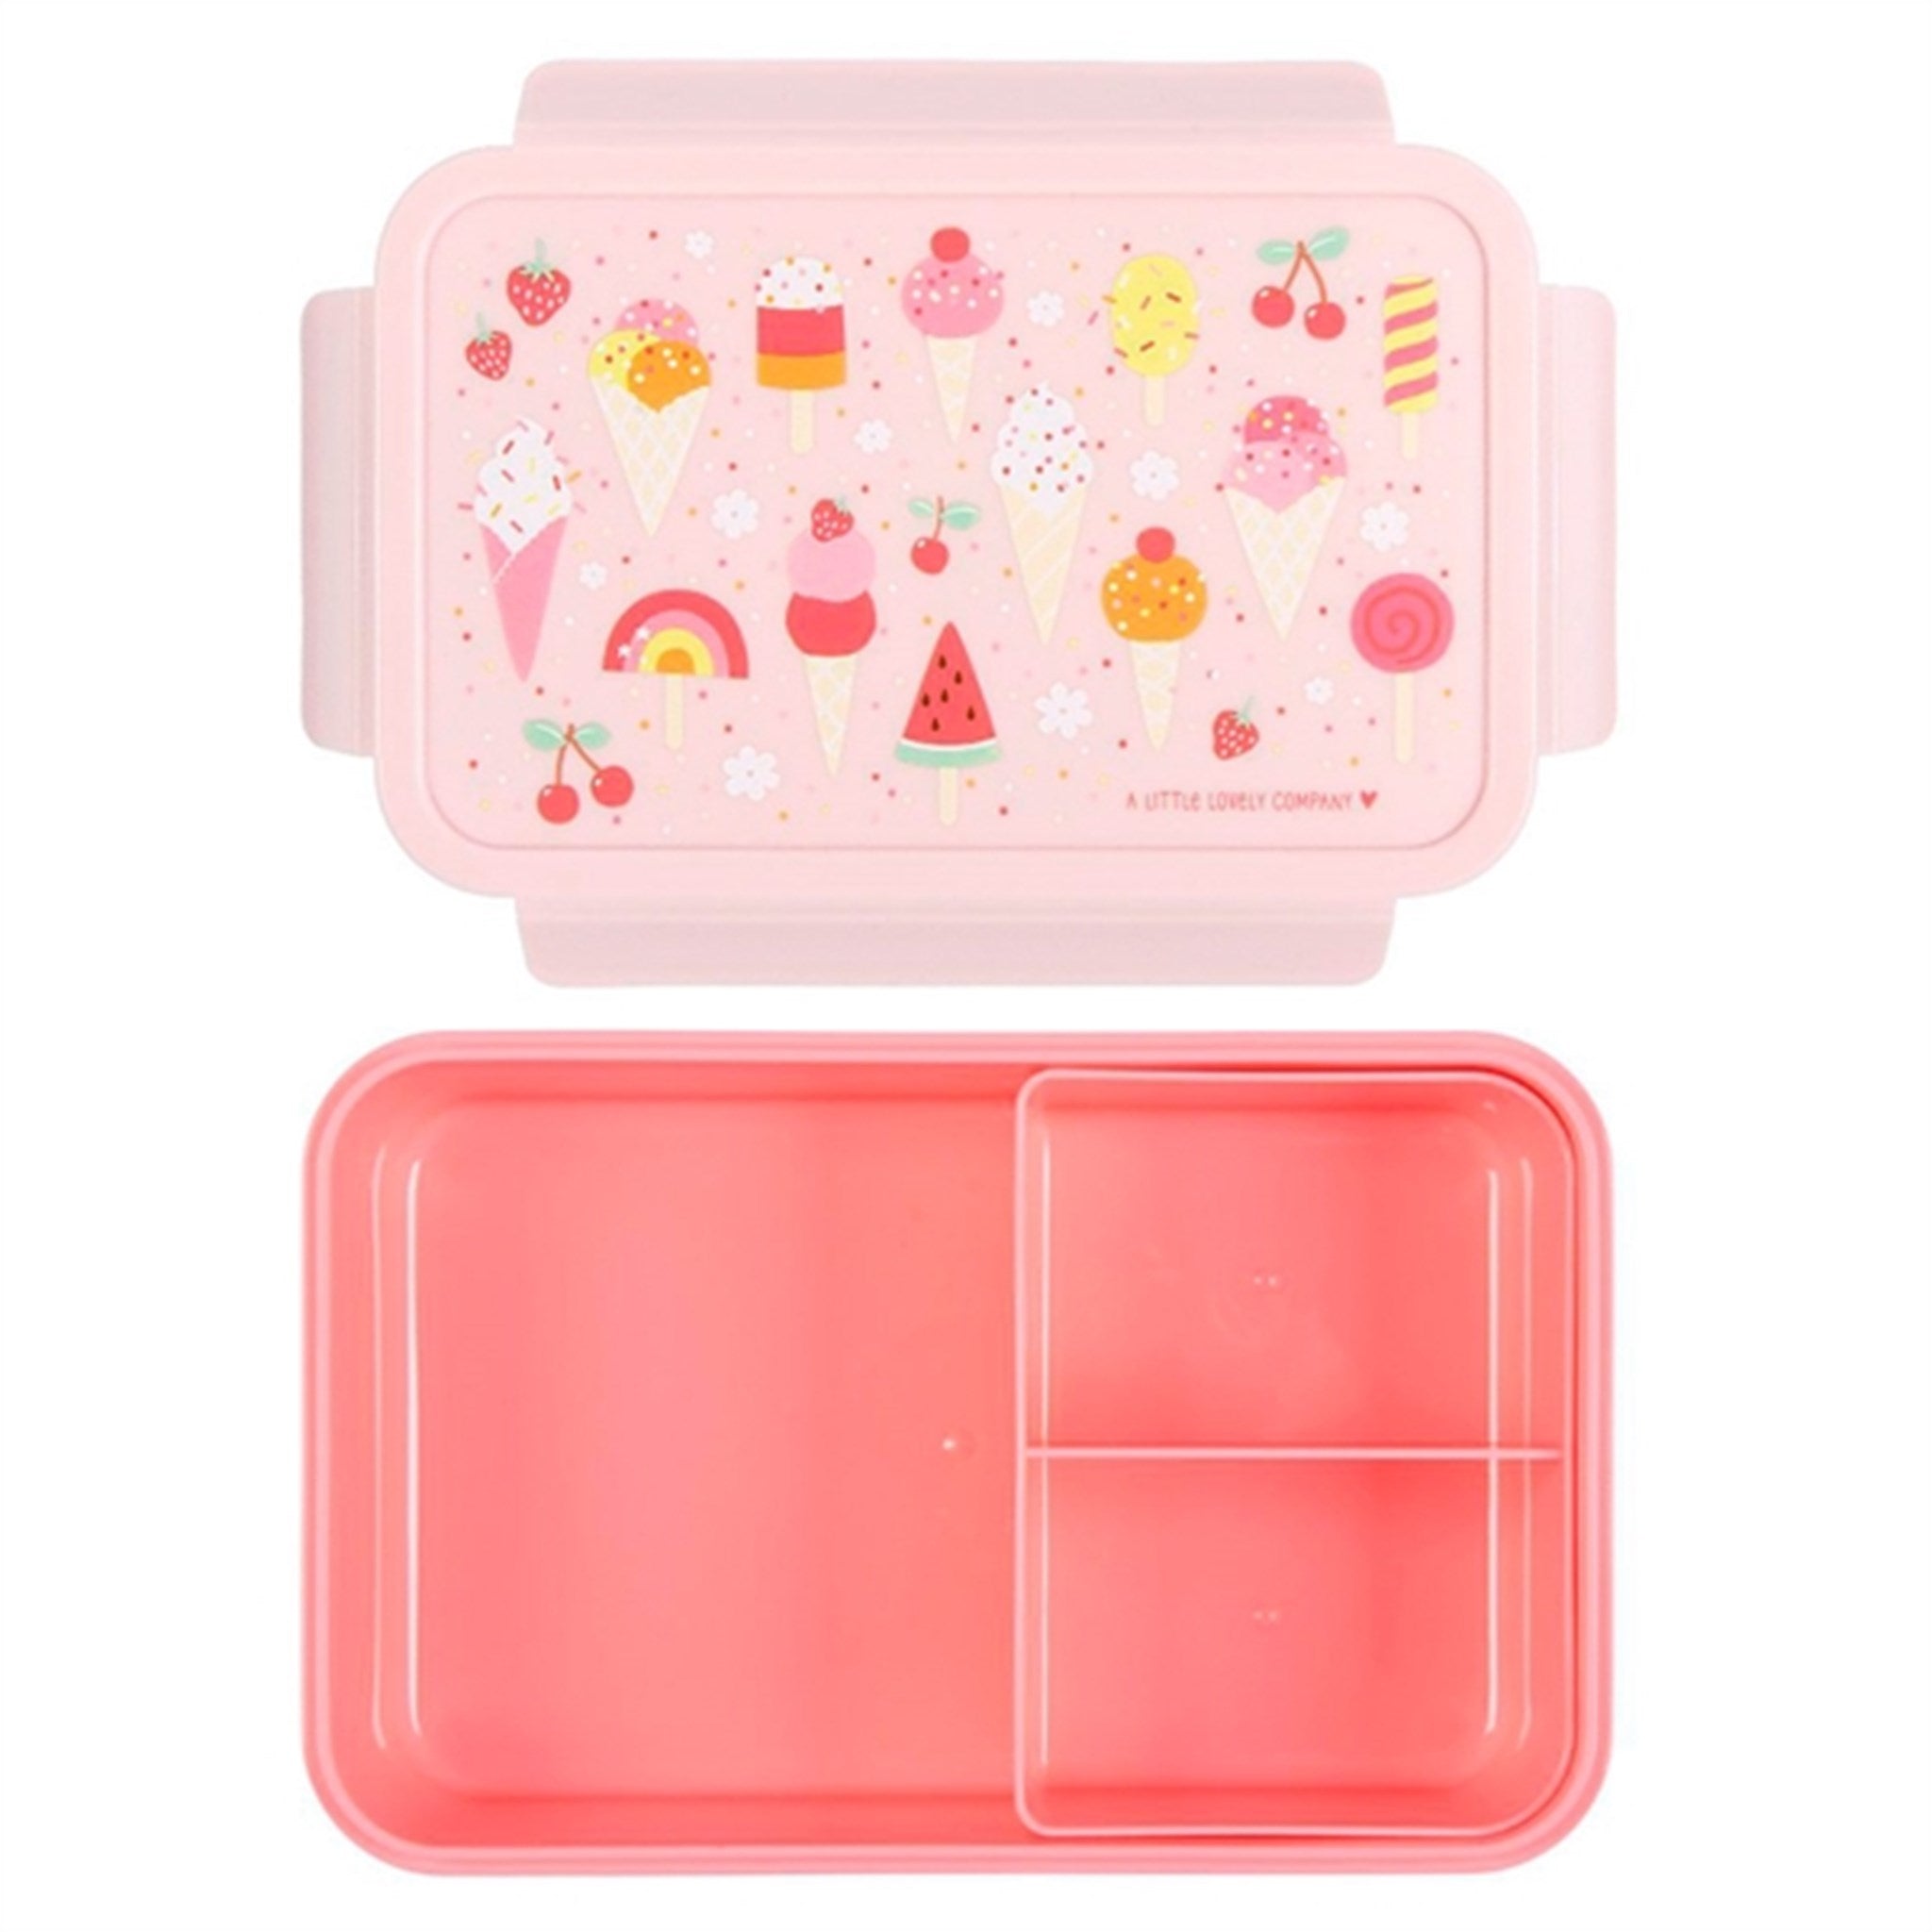 A Little Lovely Company Bento Lunch Box Ice Cream 2